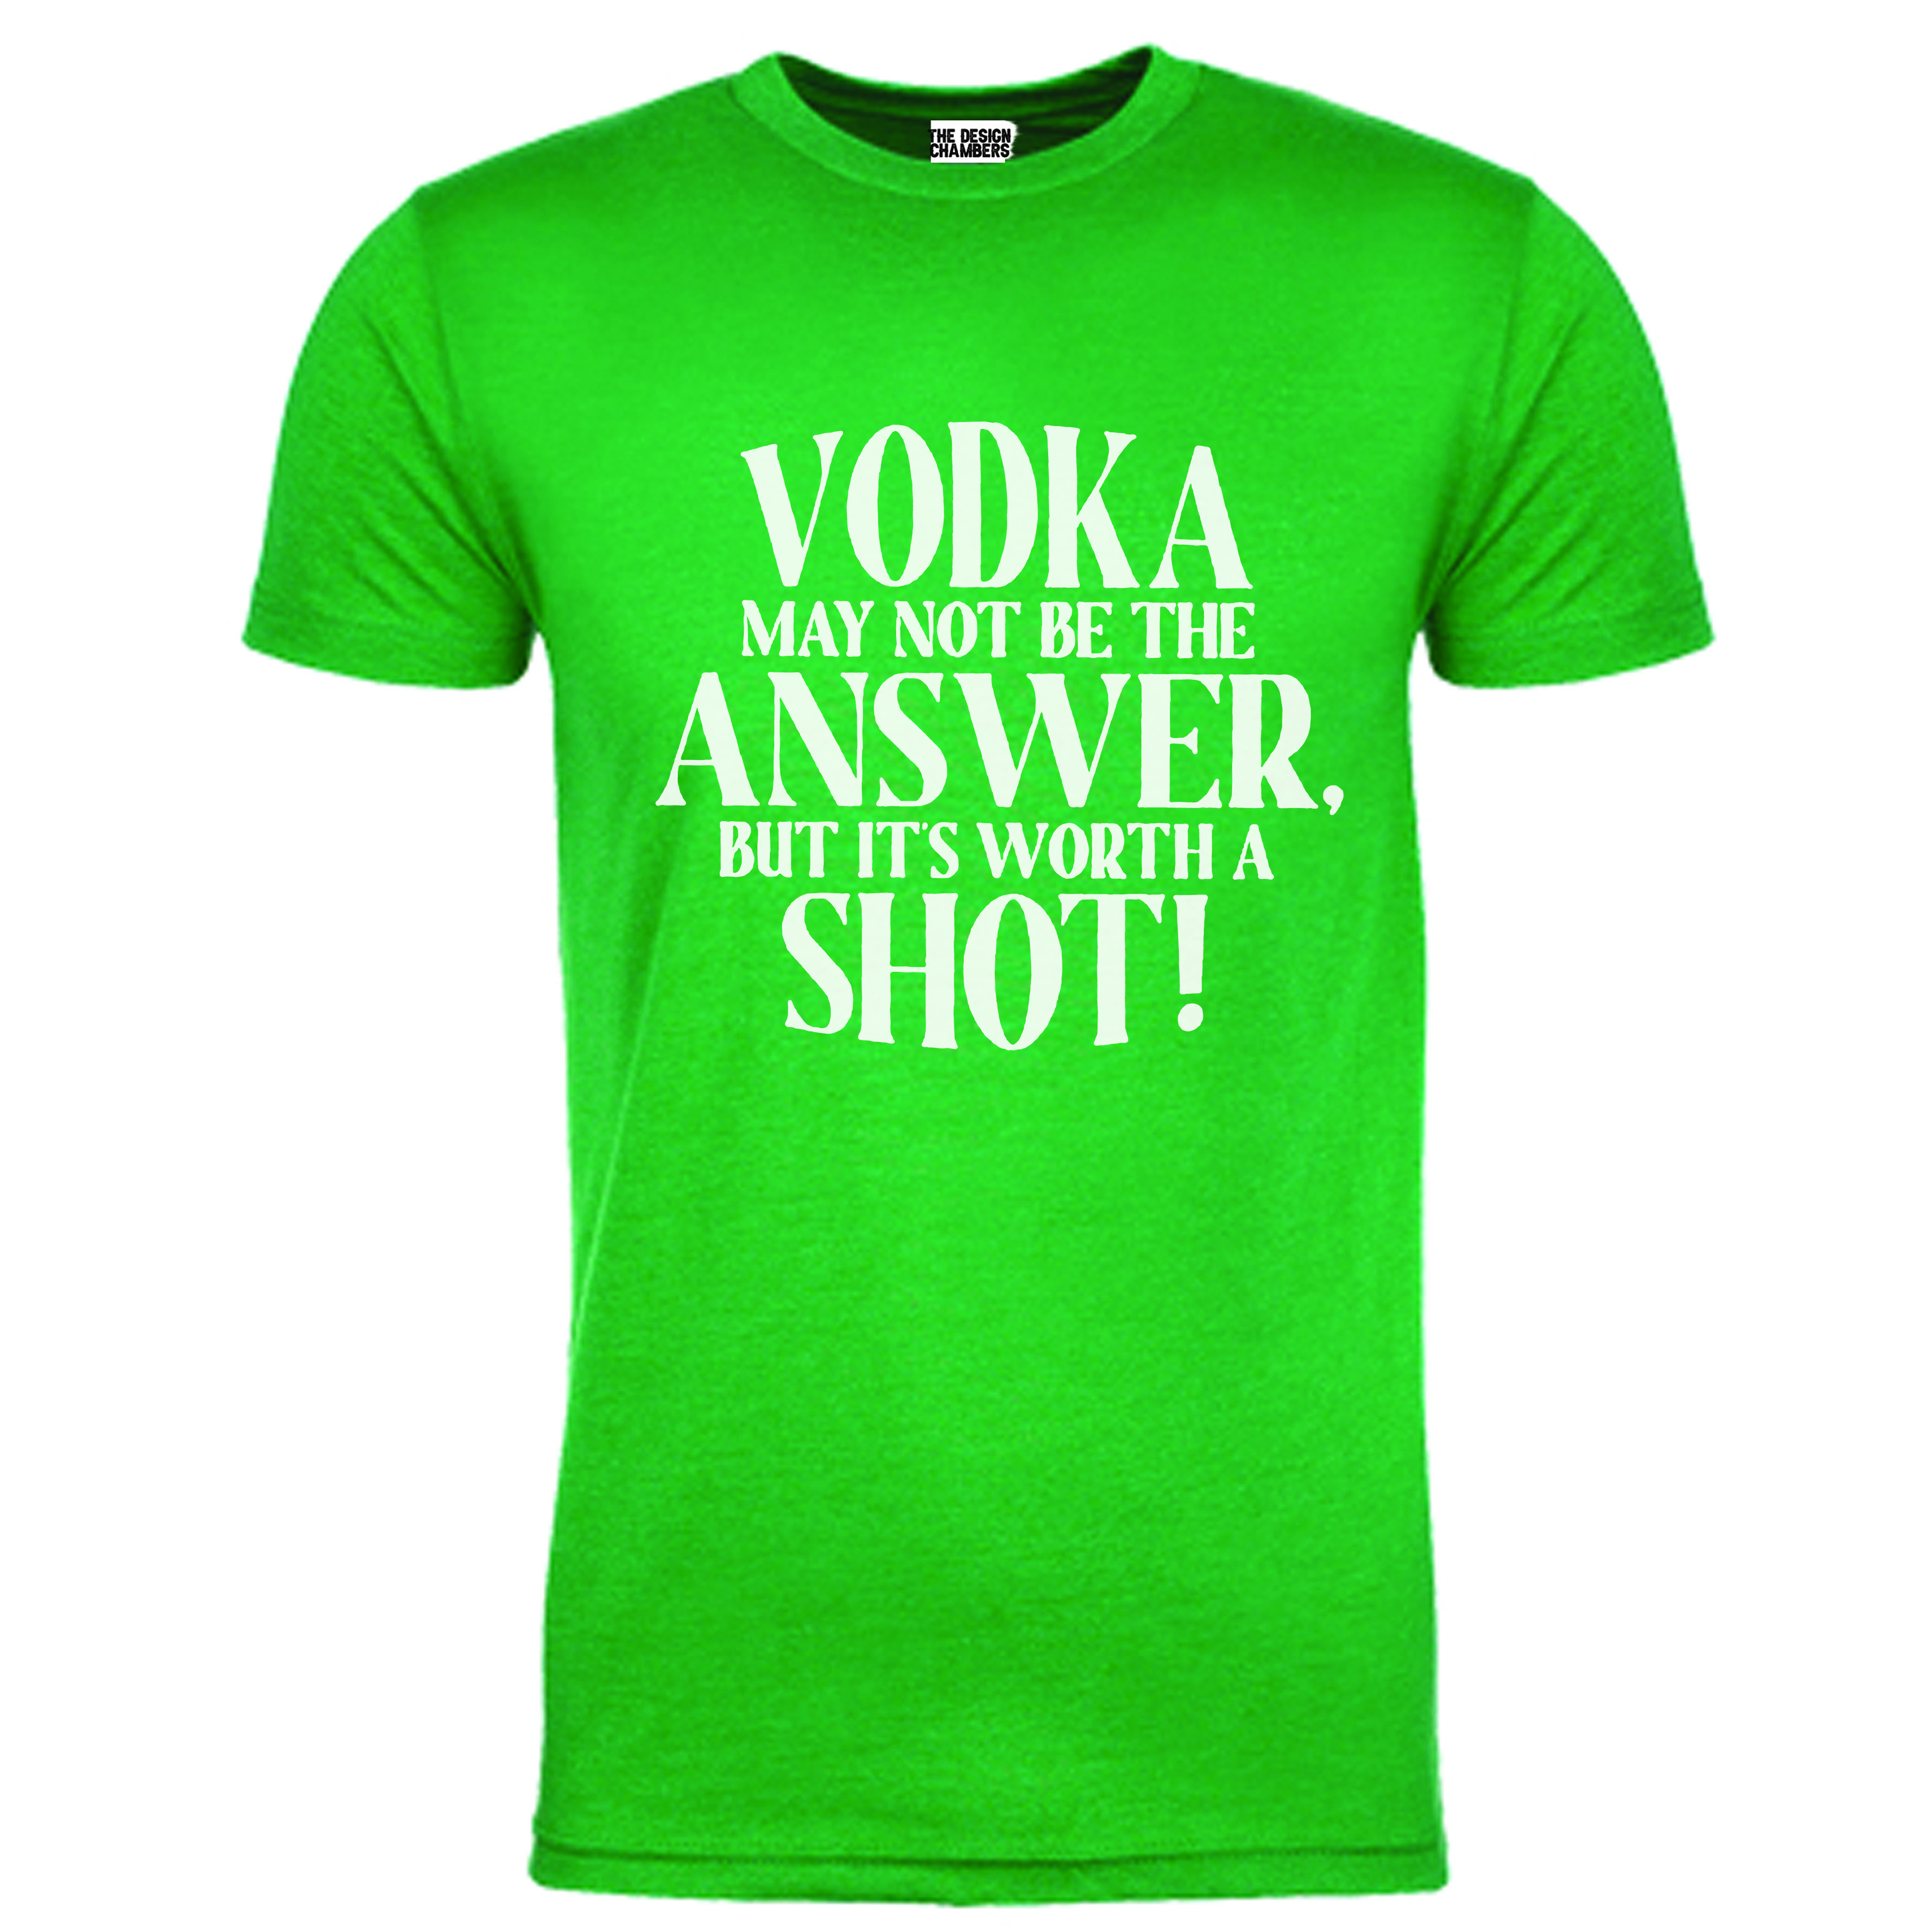 Vodka May not be the answer but its worth a shot Unisex T-shirt